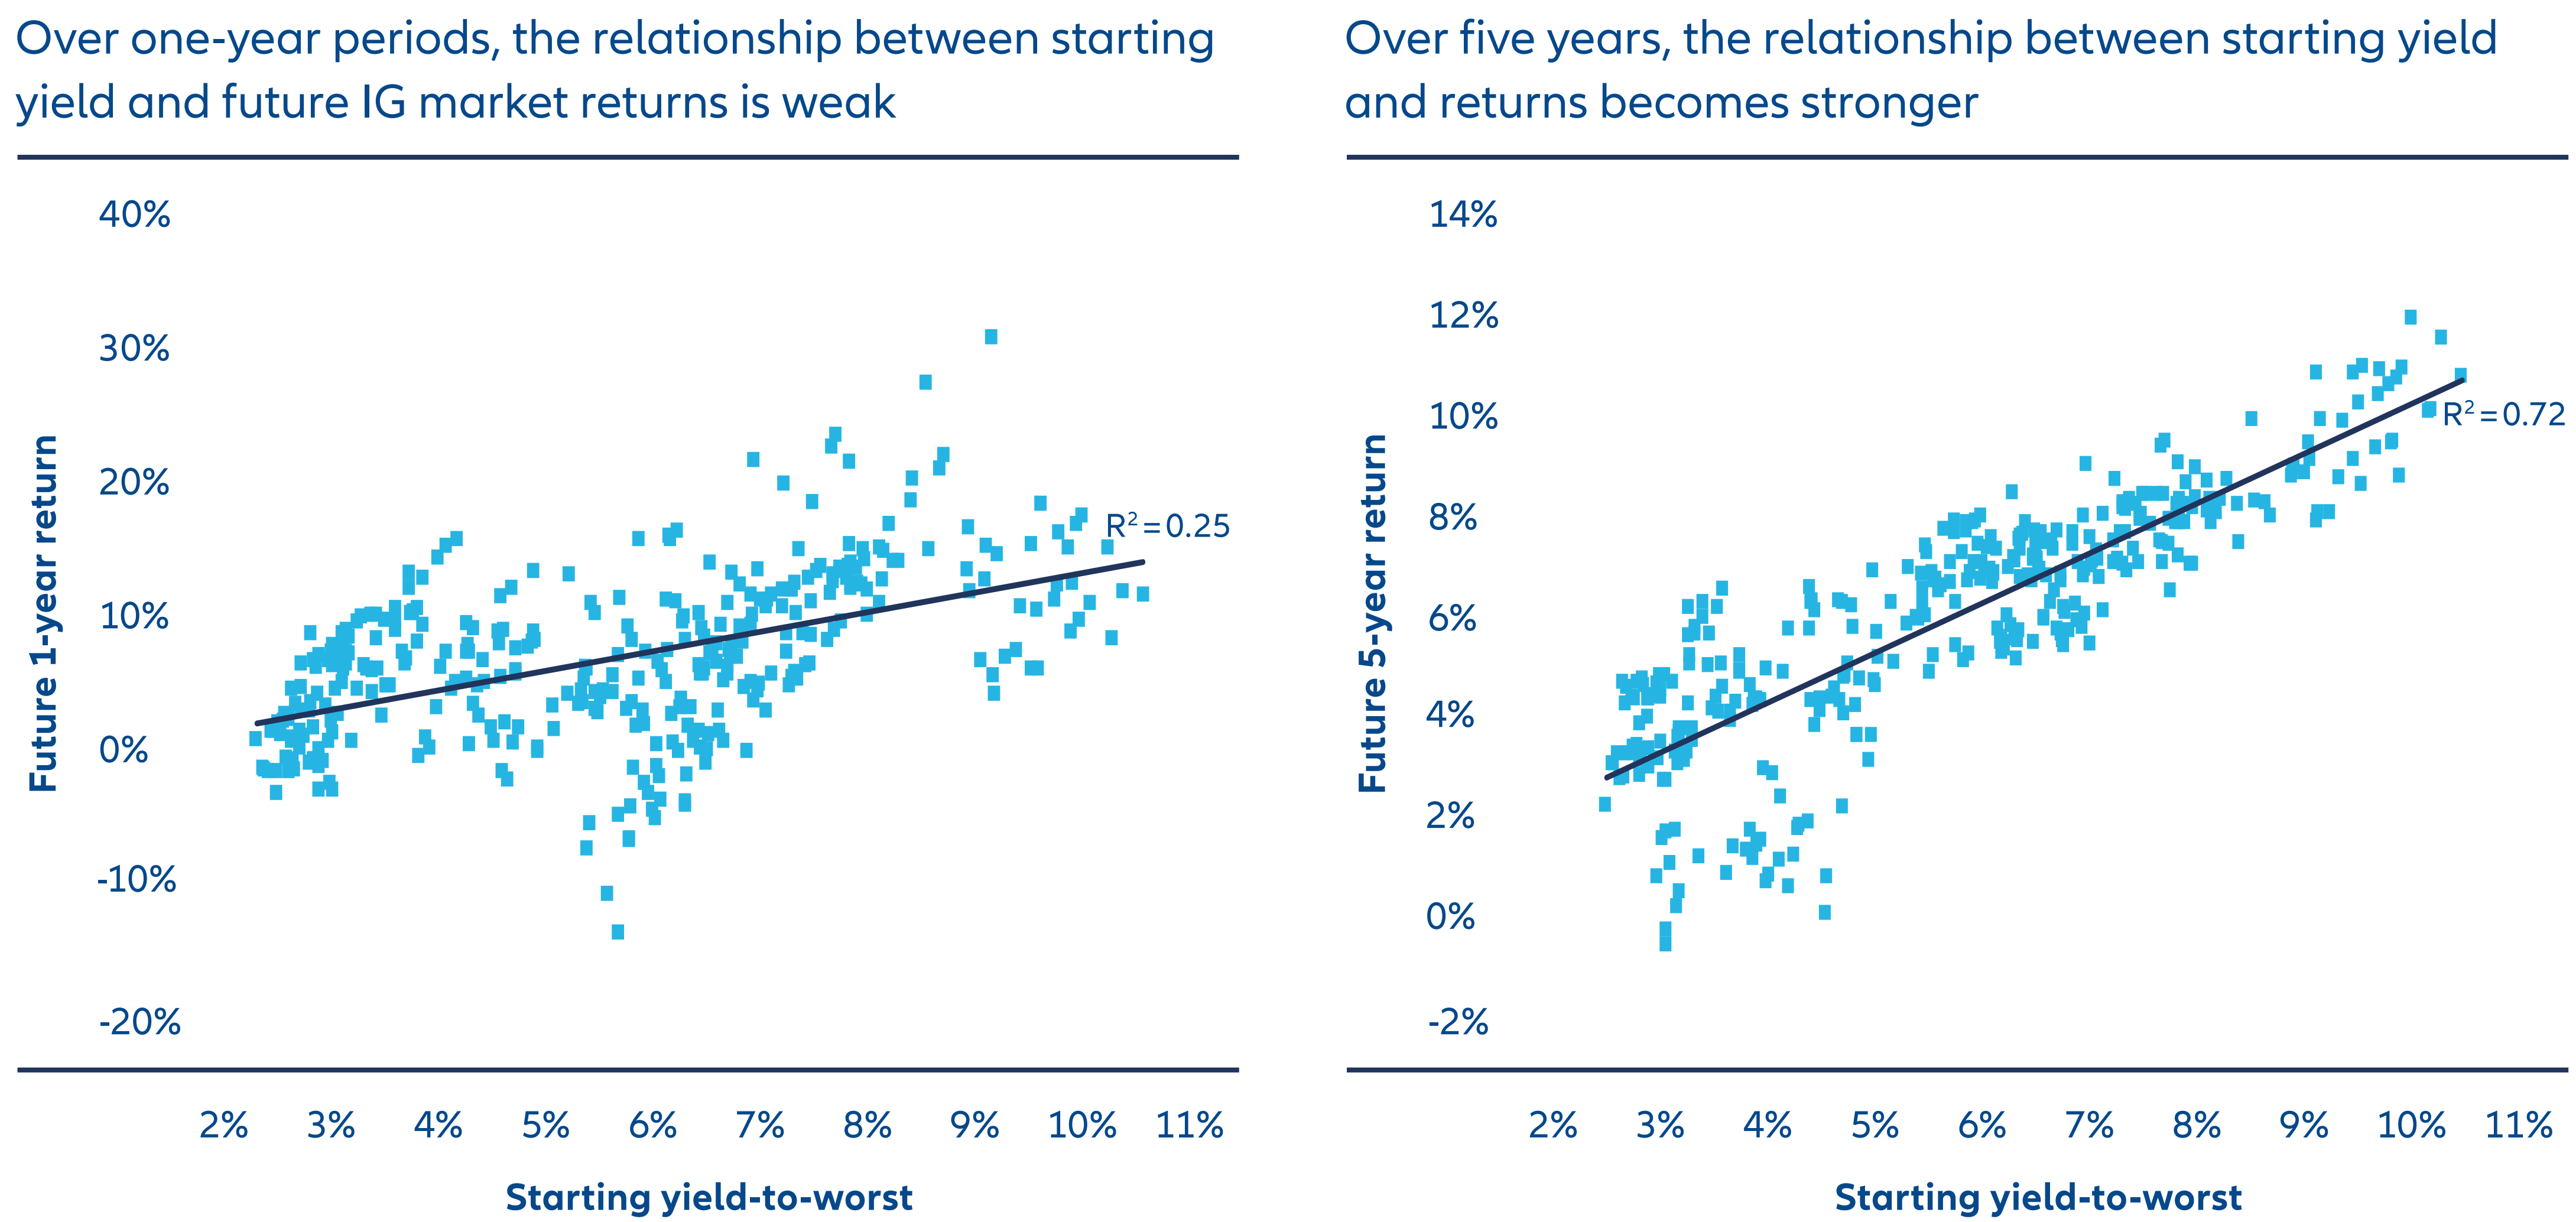 Exhibit 1: With longer time horizons, starting yield has been a stronger indicator of returns